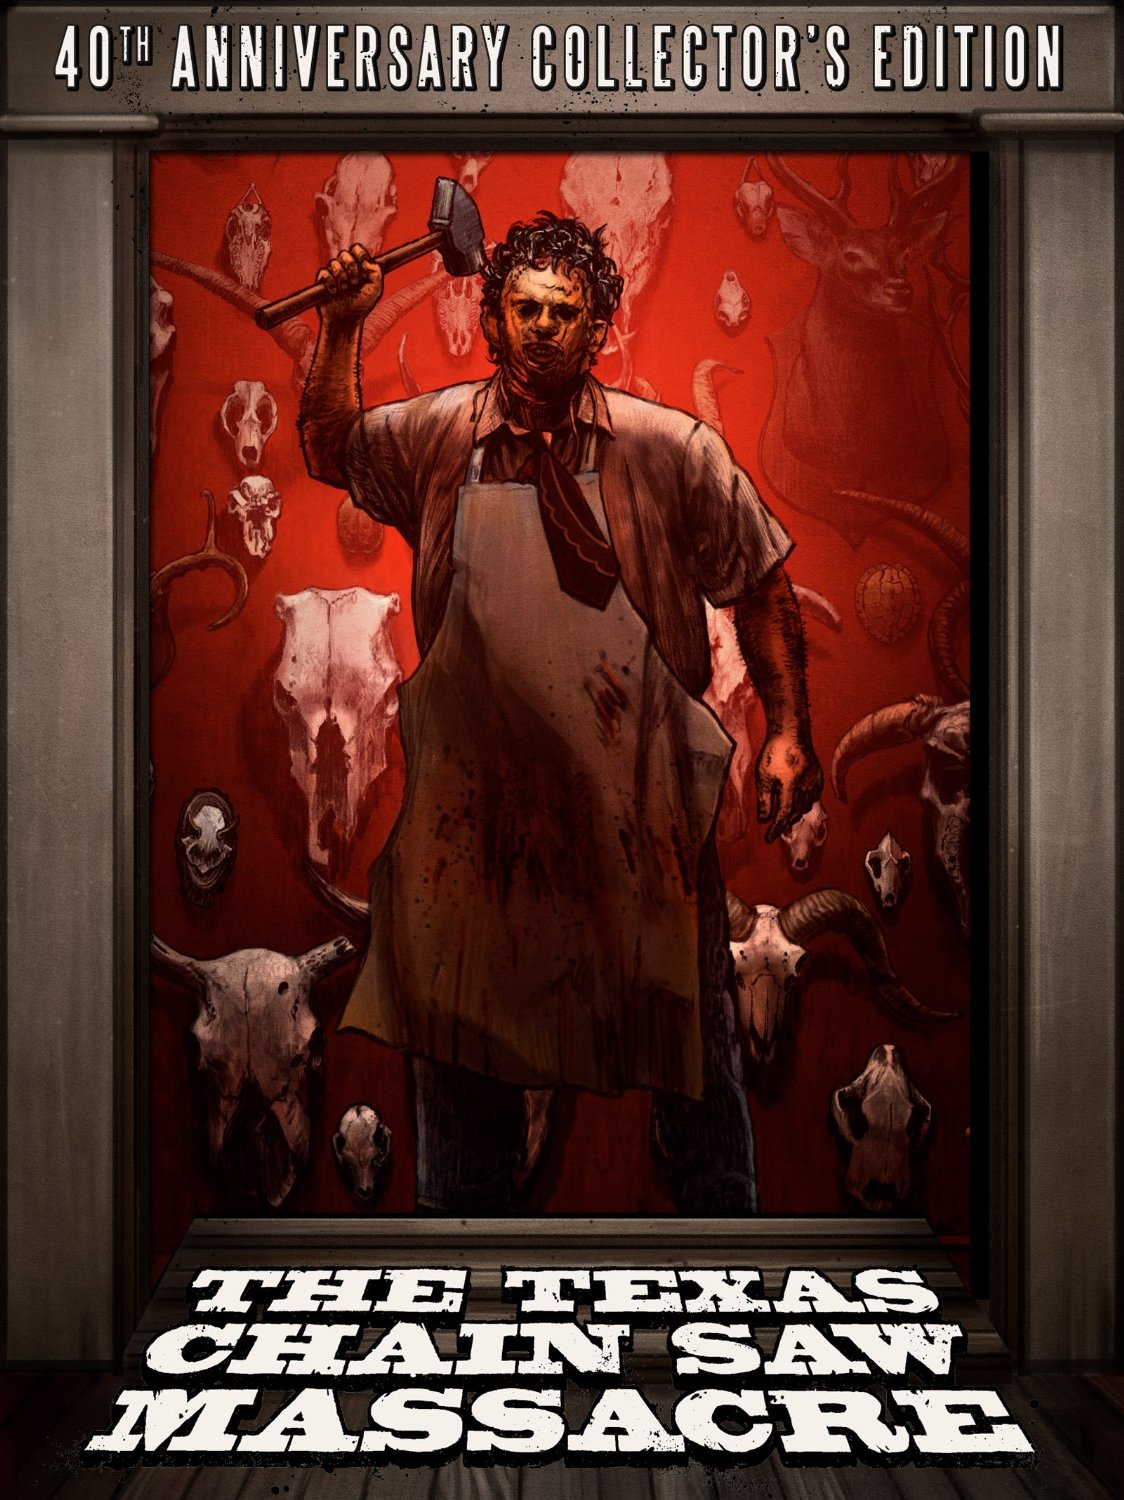 In 1974, “Texas” was the Dirtiest Word in 'The Texas Chainsaw